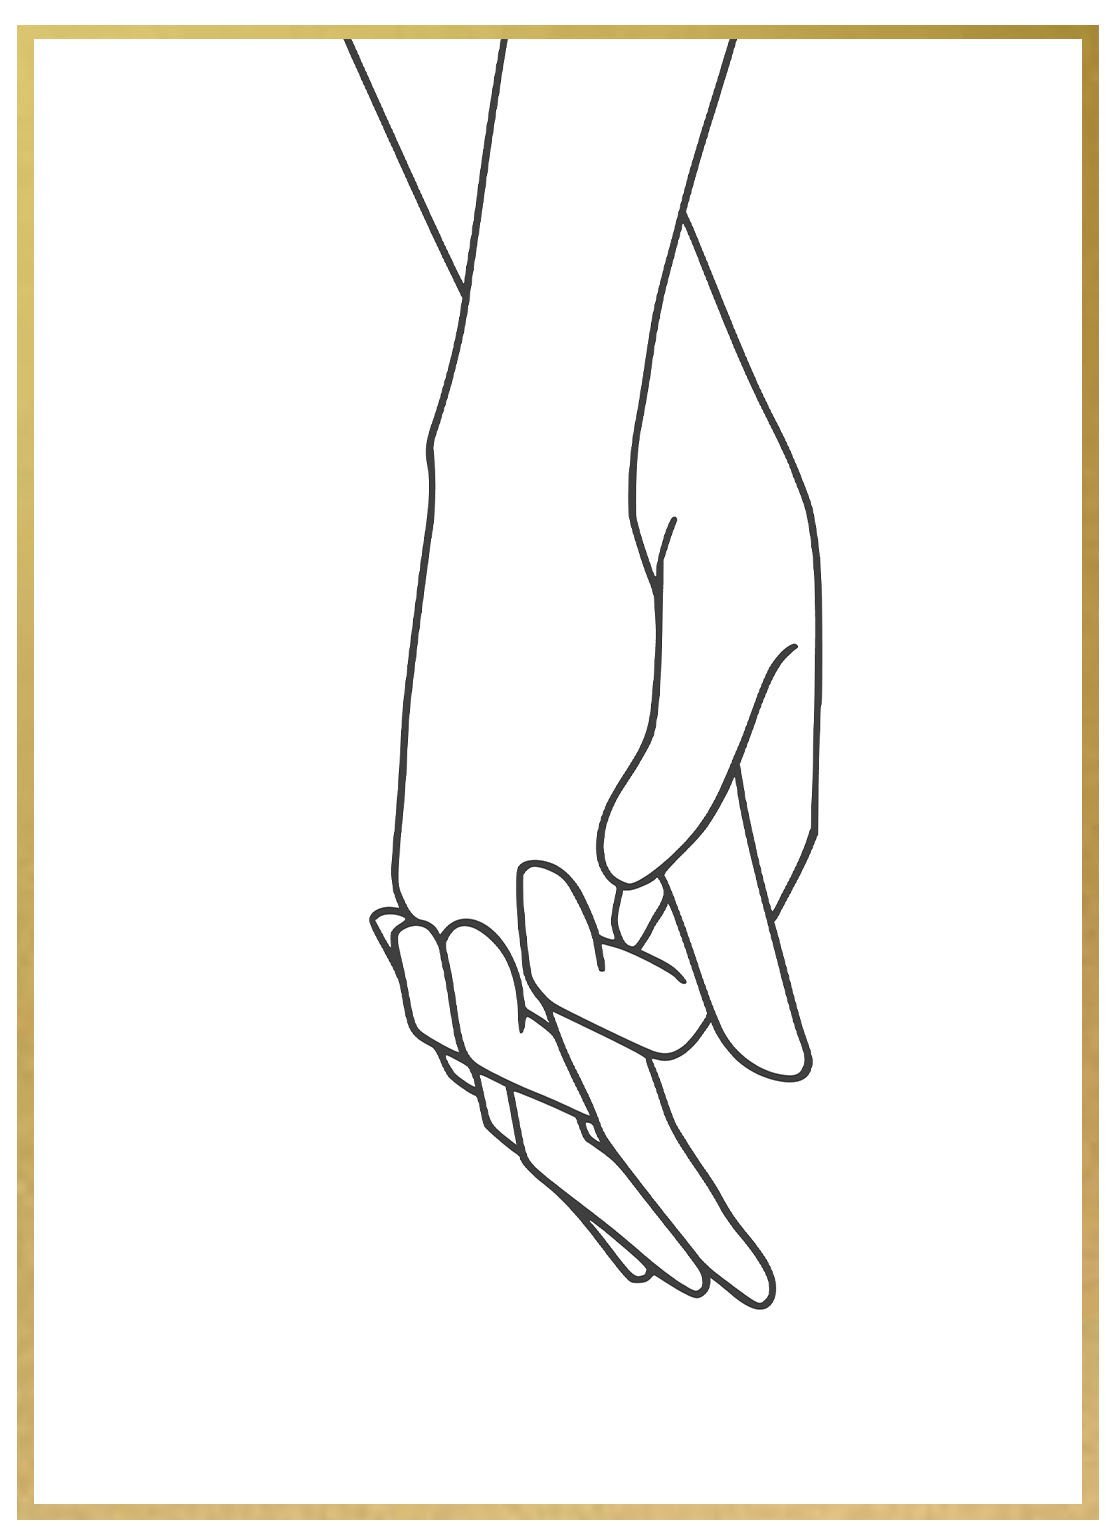 Lineart Holding Hands - Avemfactory